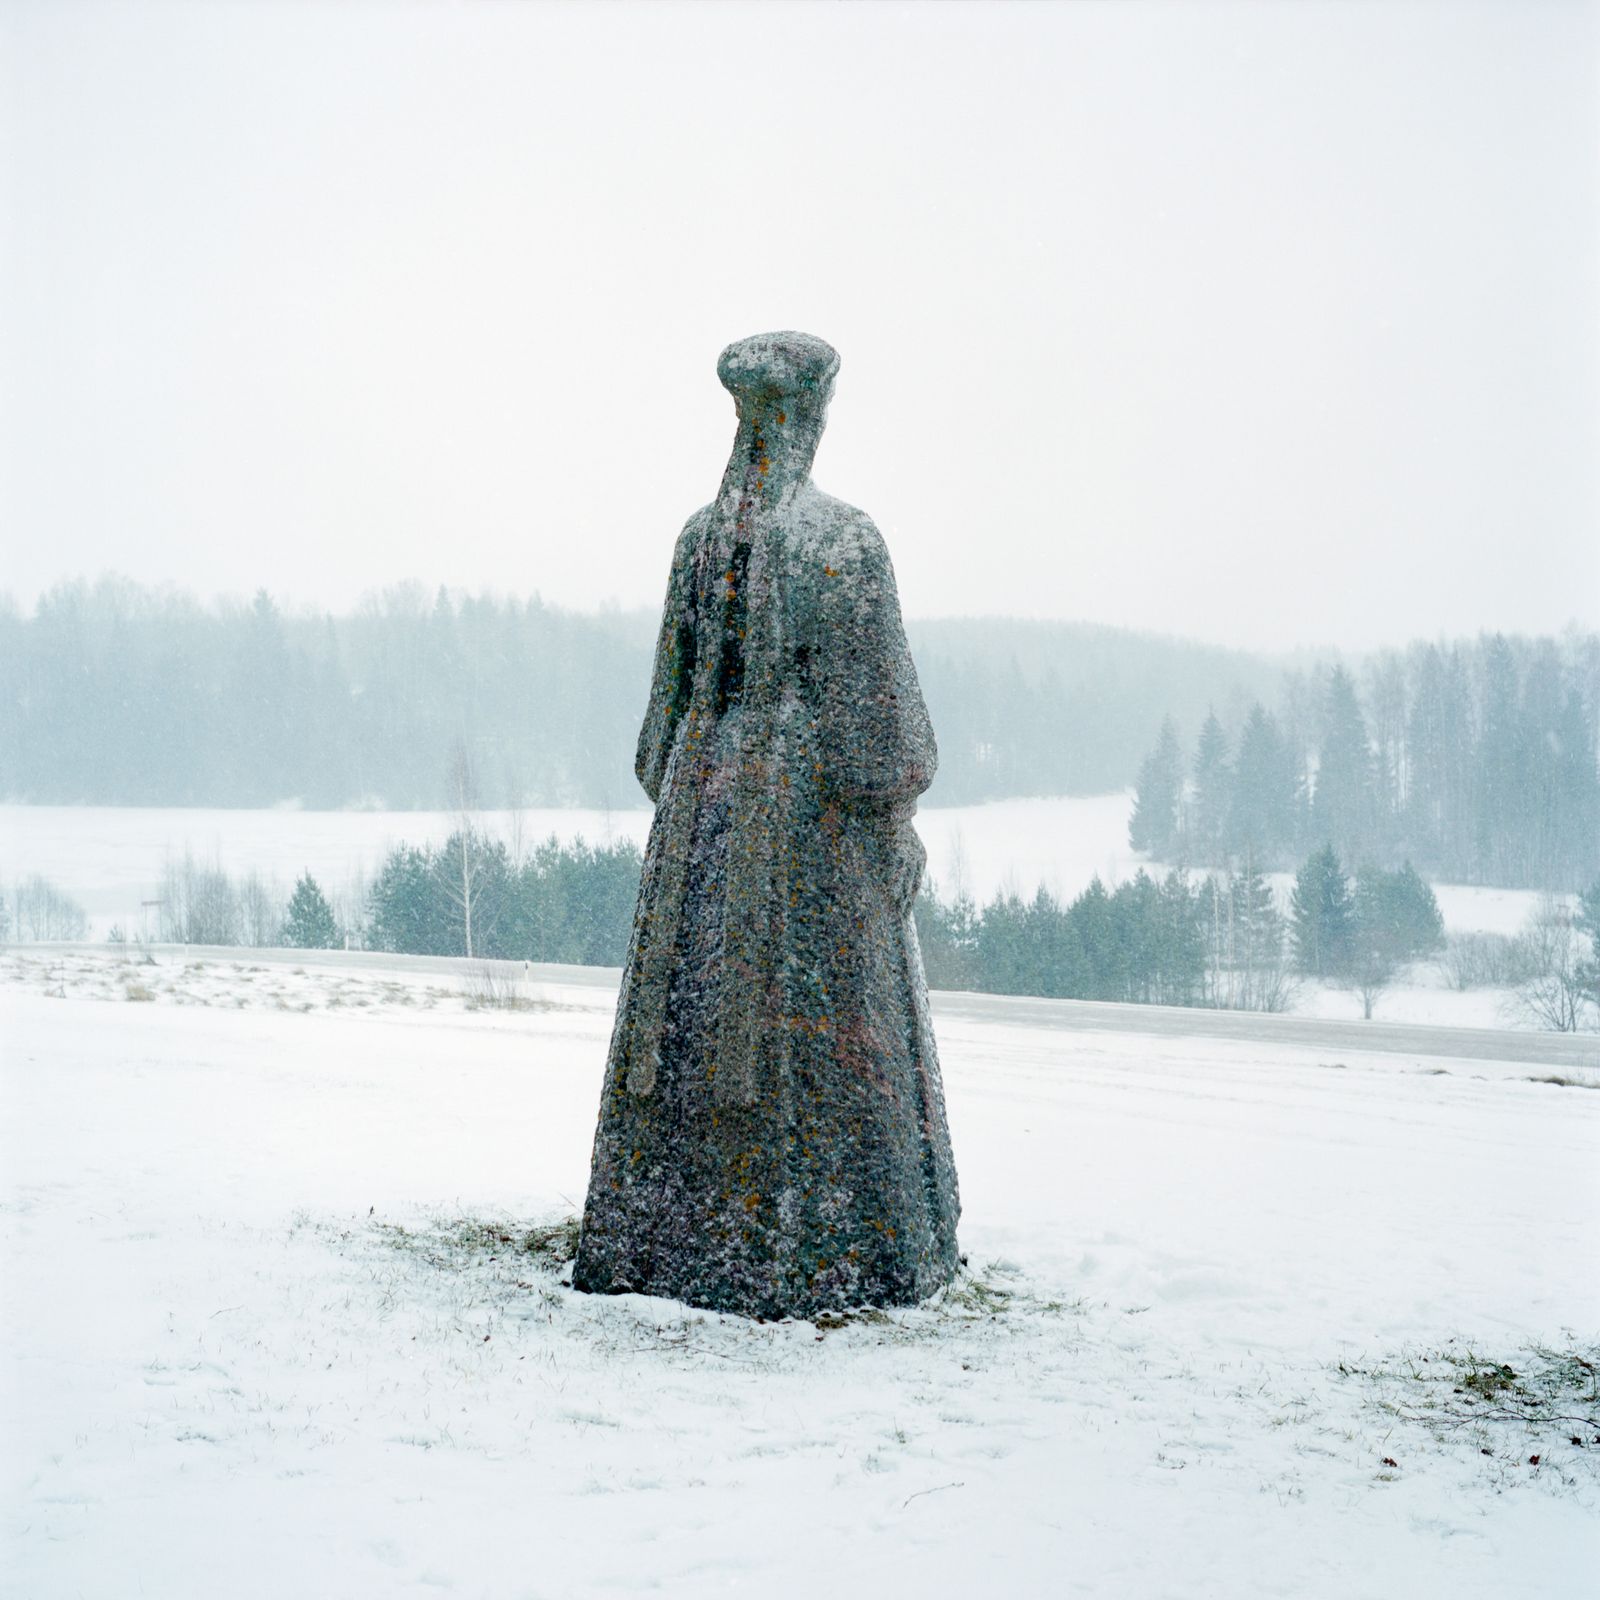 © Jérémie Jung - Image from the Setomaa, a Kingdom on the Edge photography project